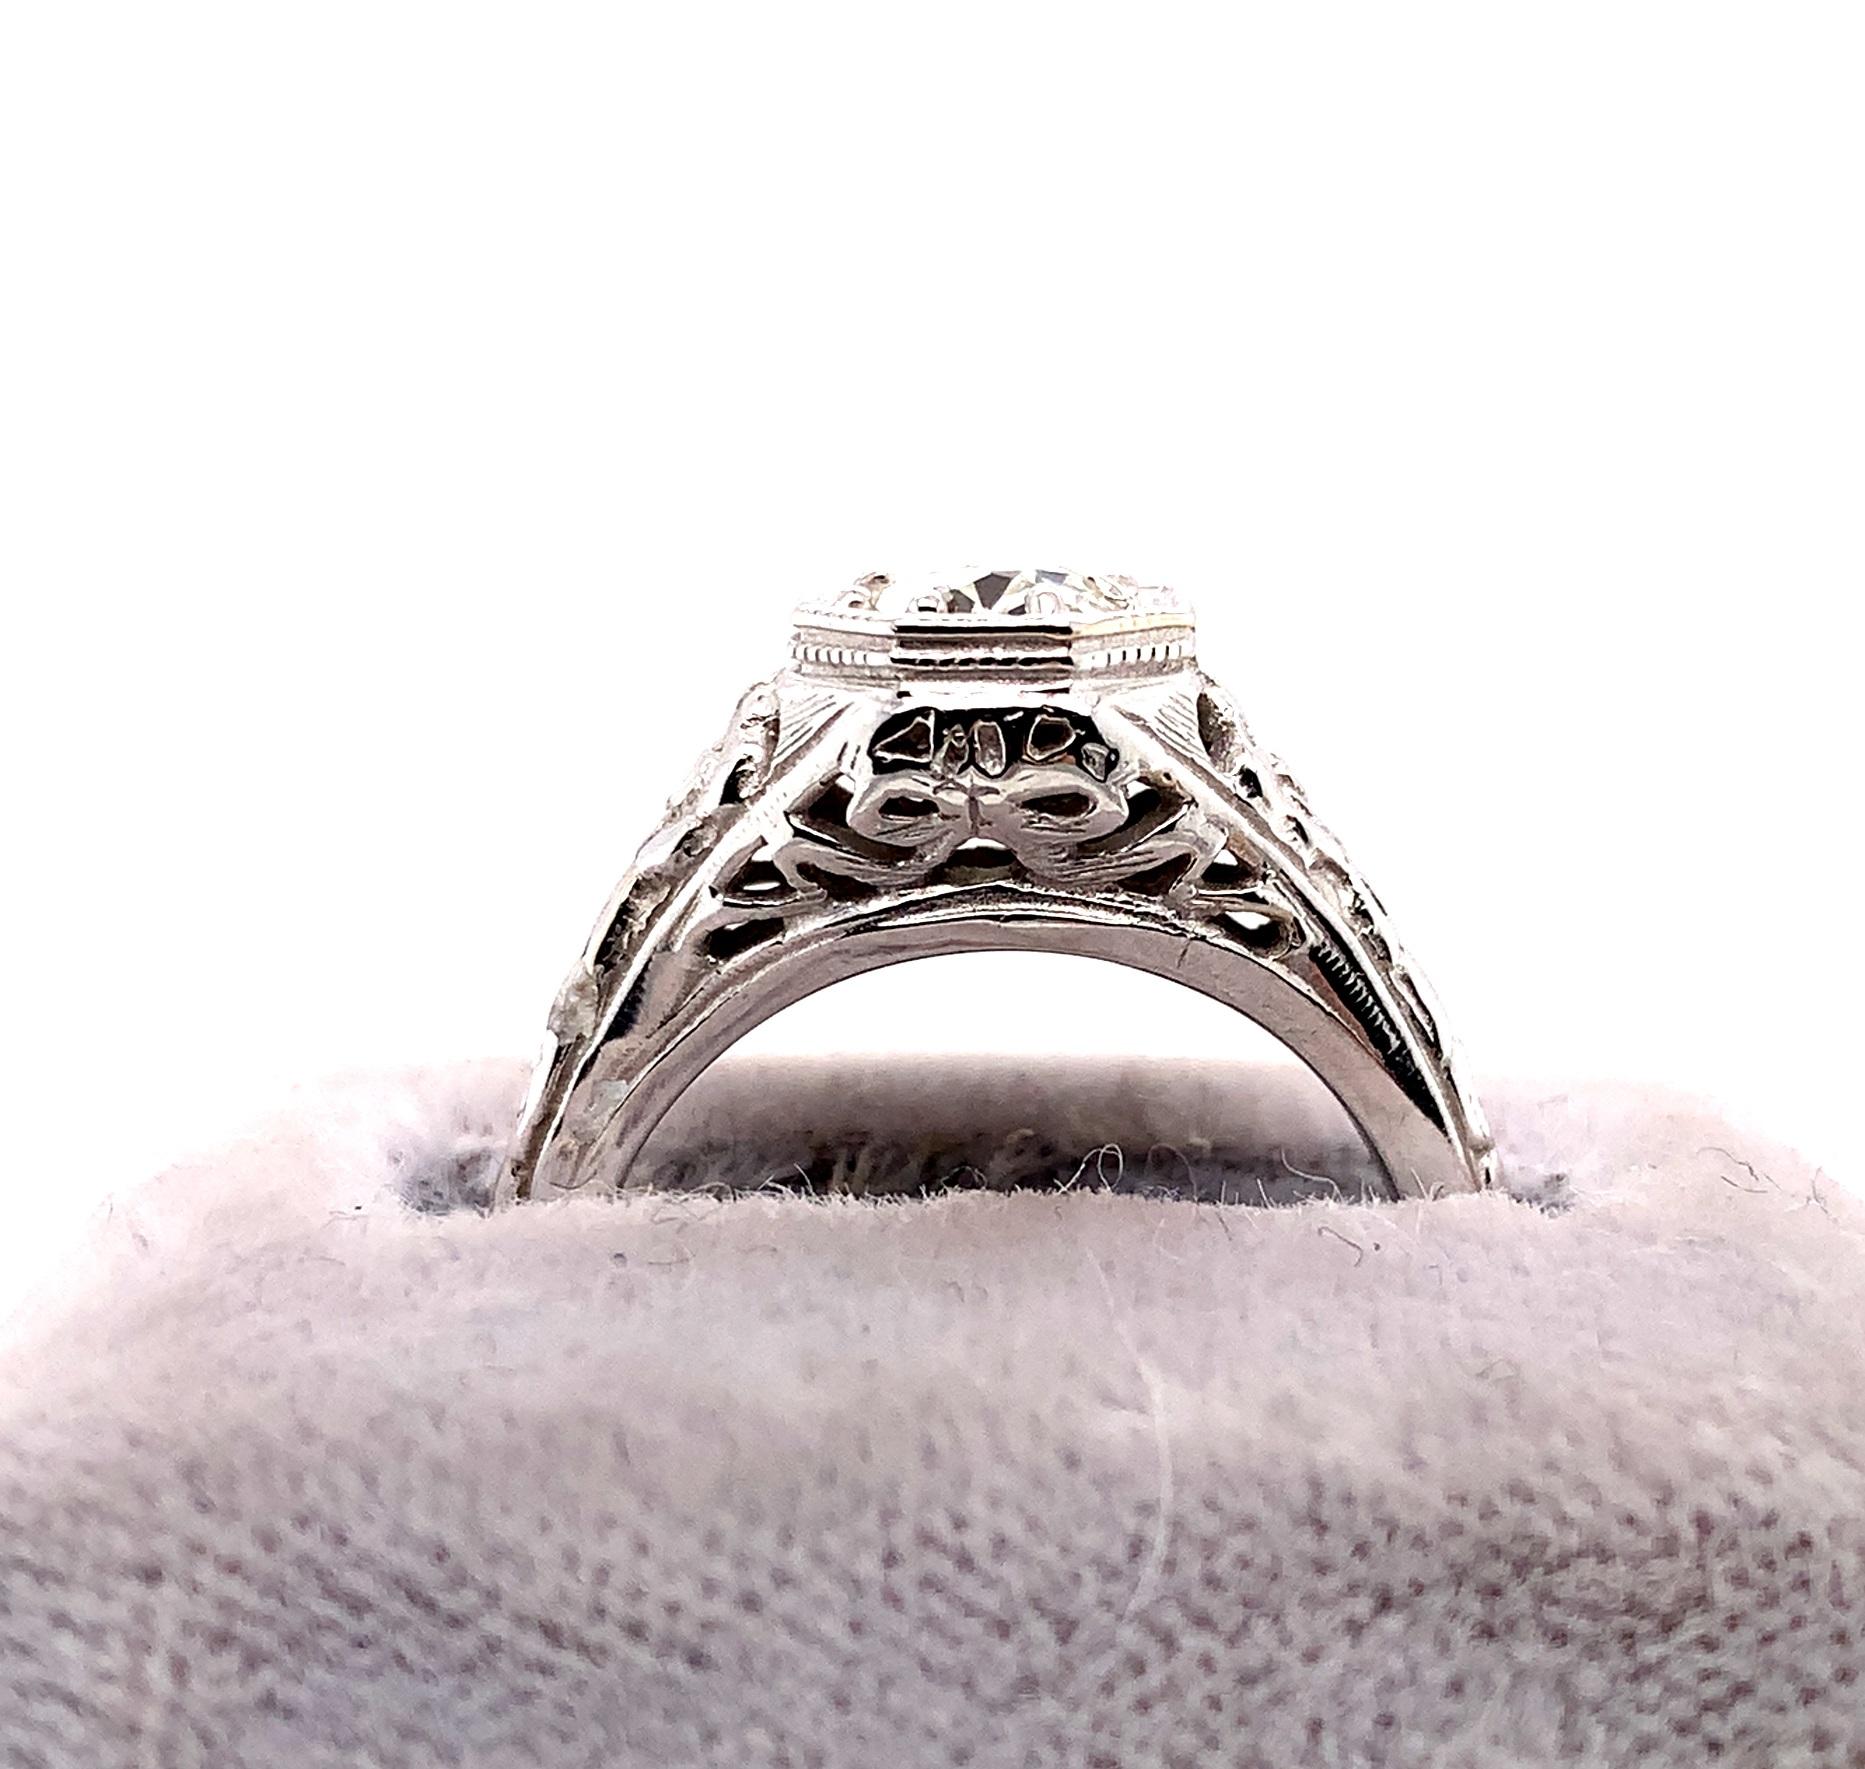 14K white gold filigree ring featuring an European cut diamond weighing about 3/4 carat. The diamond has SI2 clarity and I-J color. It measures about 6mm. The antique diamond is set in a beautiful modern filigree setting with ribbons and flowers.